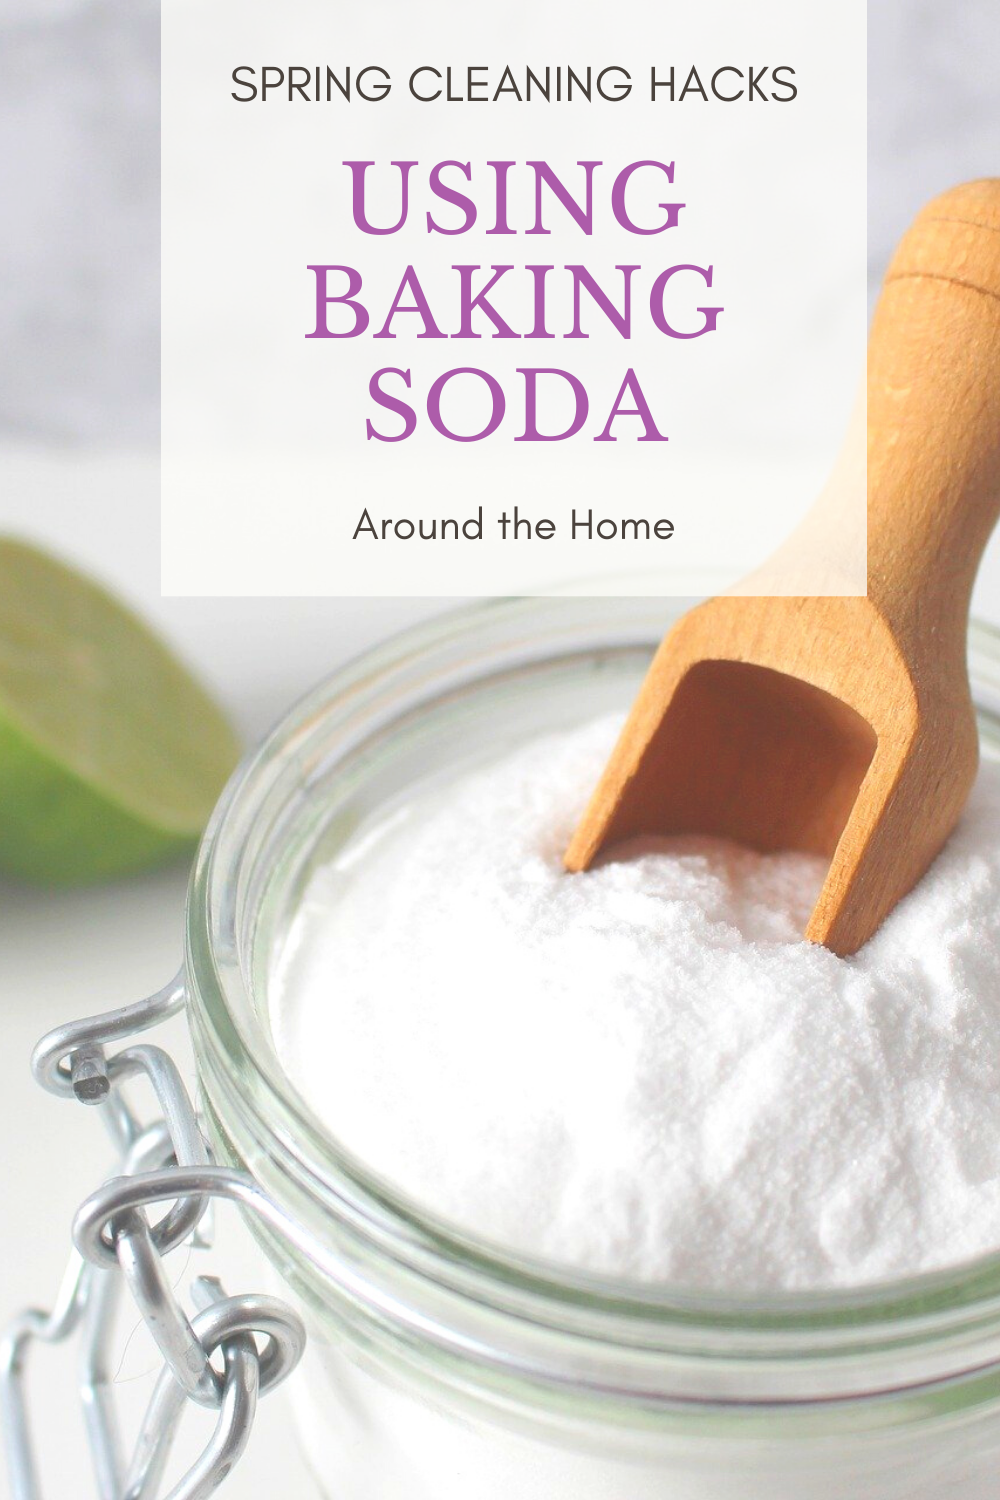 Why use chemical-filled cleaners when baking soda works just as well? It's eco-friendly, cheap and effective, especially in these Spring Cleaning Hacks!